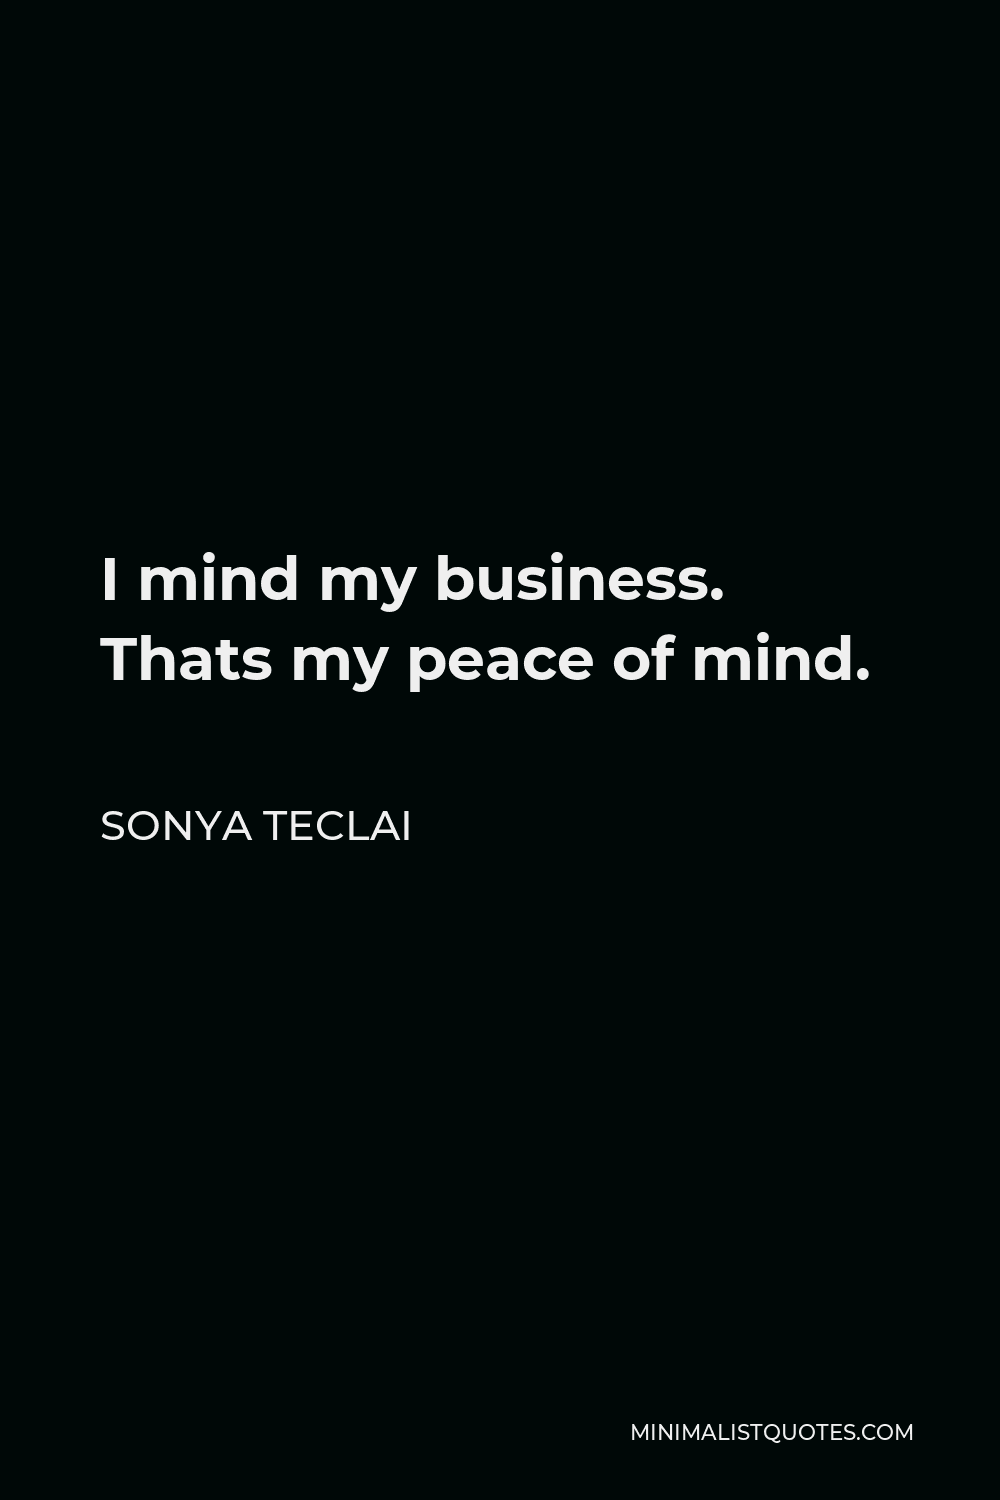 sonya-teclai-quote-i-mind-my-business-thats-my-peace-of-mind